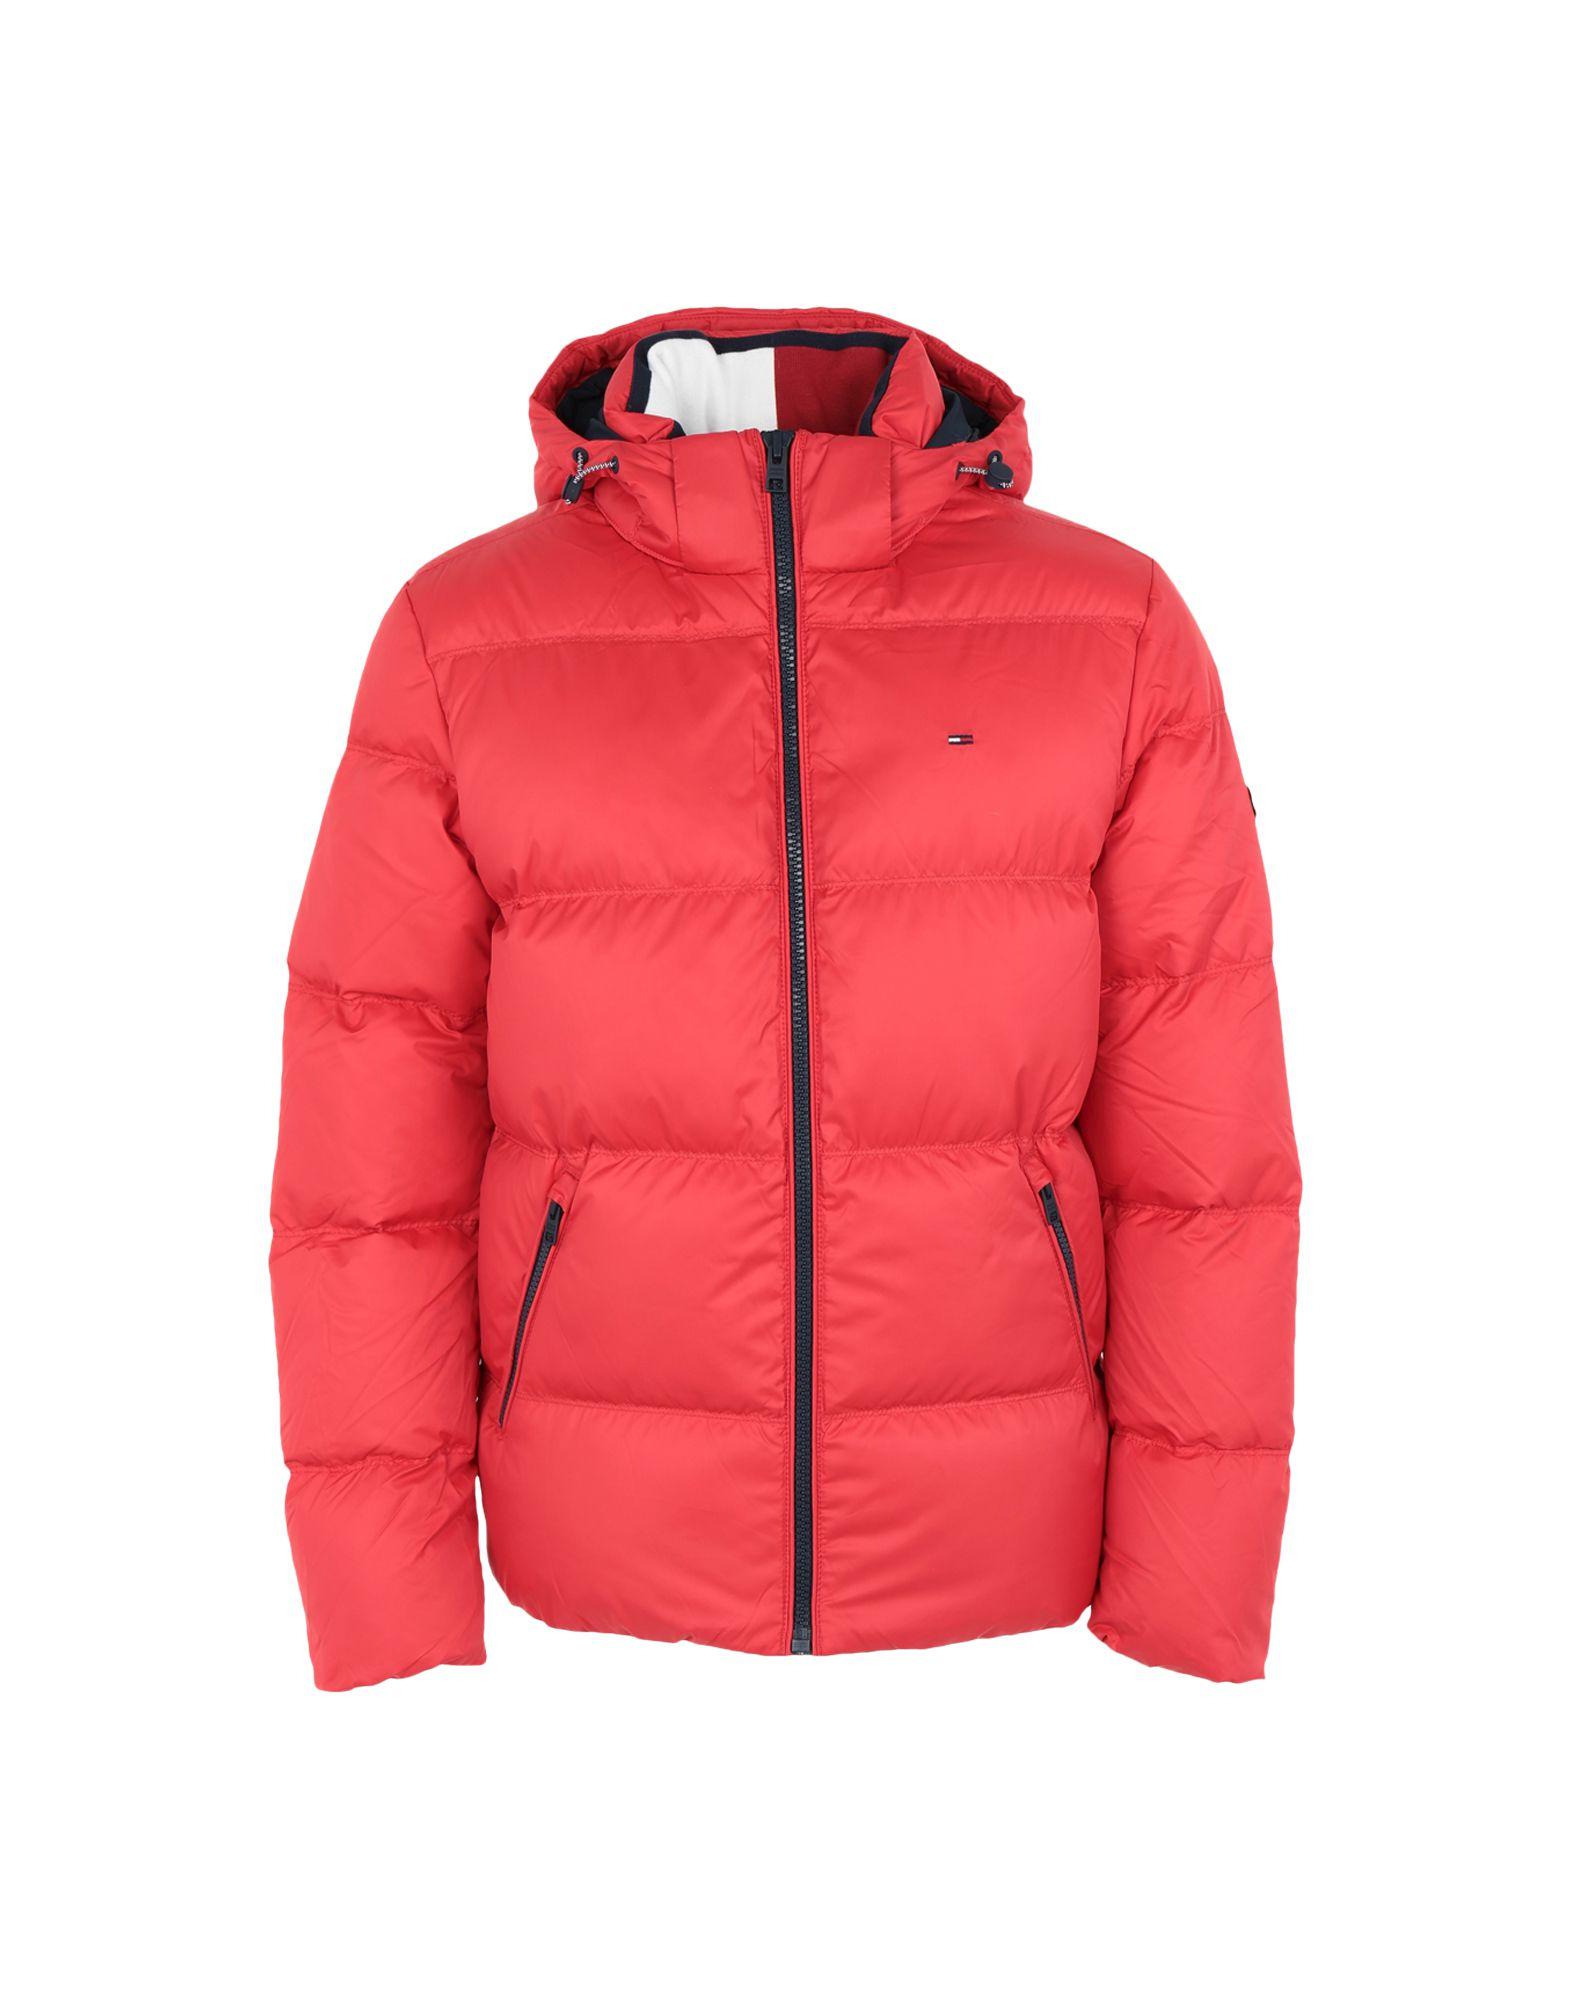 Tommy Hilfiger Synthetic Down Jacket in Red for Men - Lyst